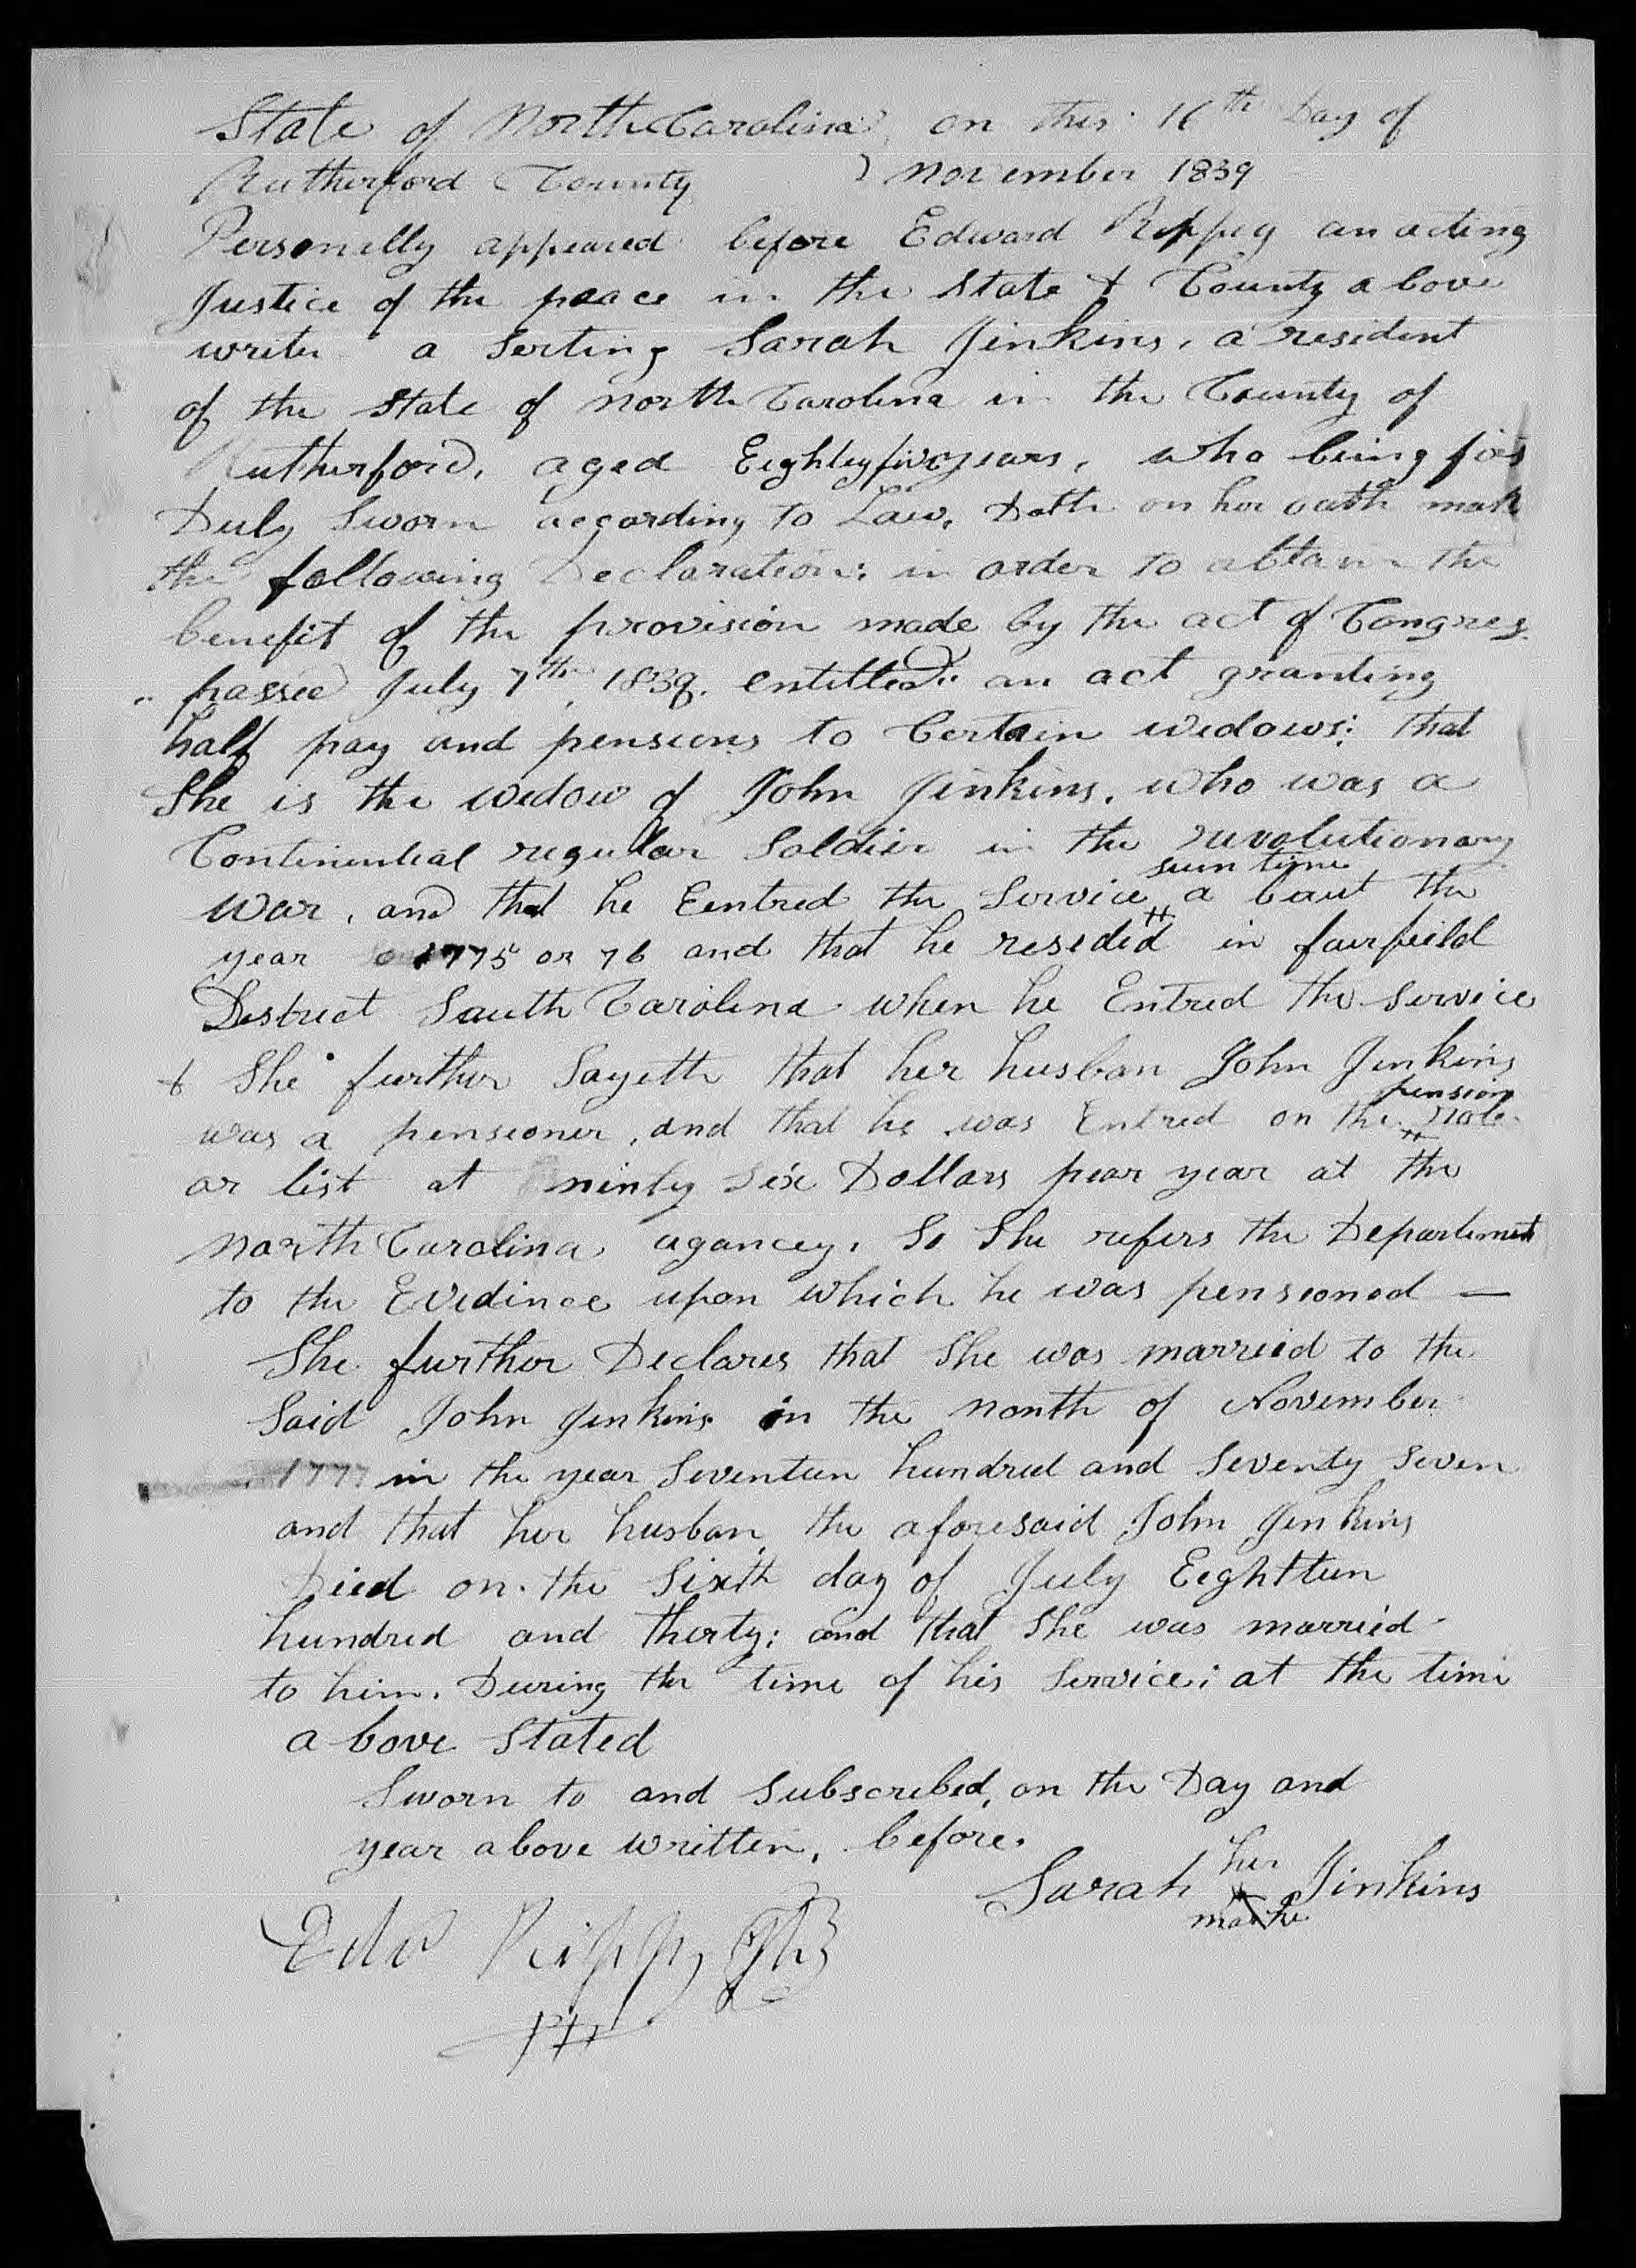 Application for a Widow's Pension from Sarah Jenkins, 16 November 1839, page 1